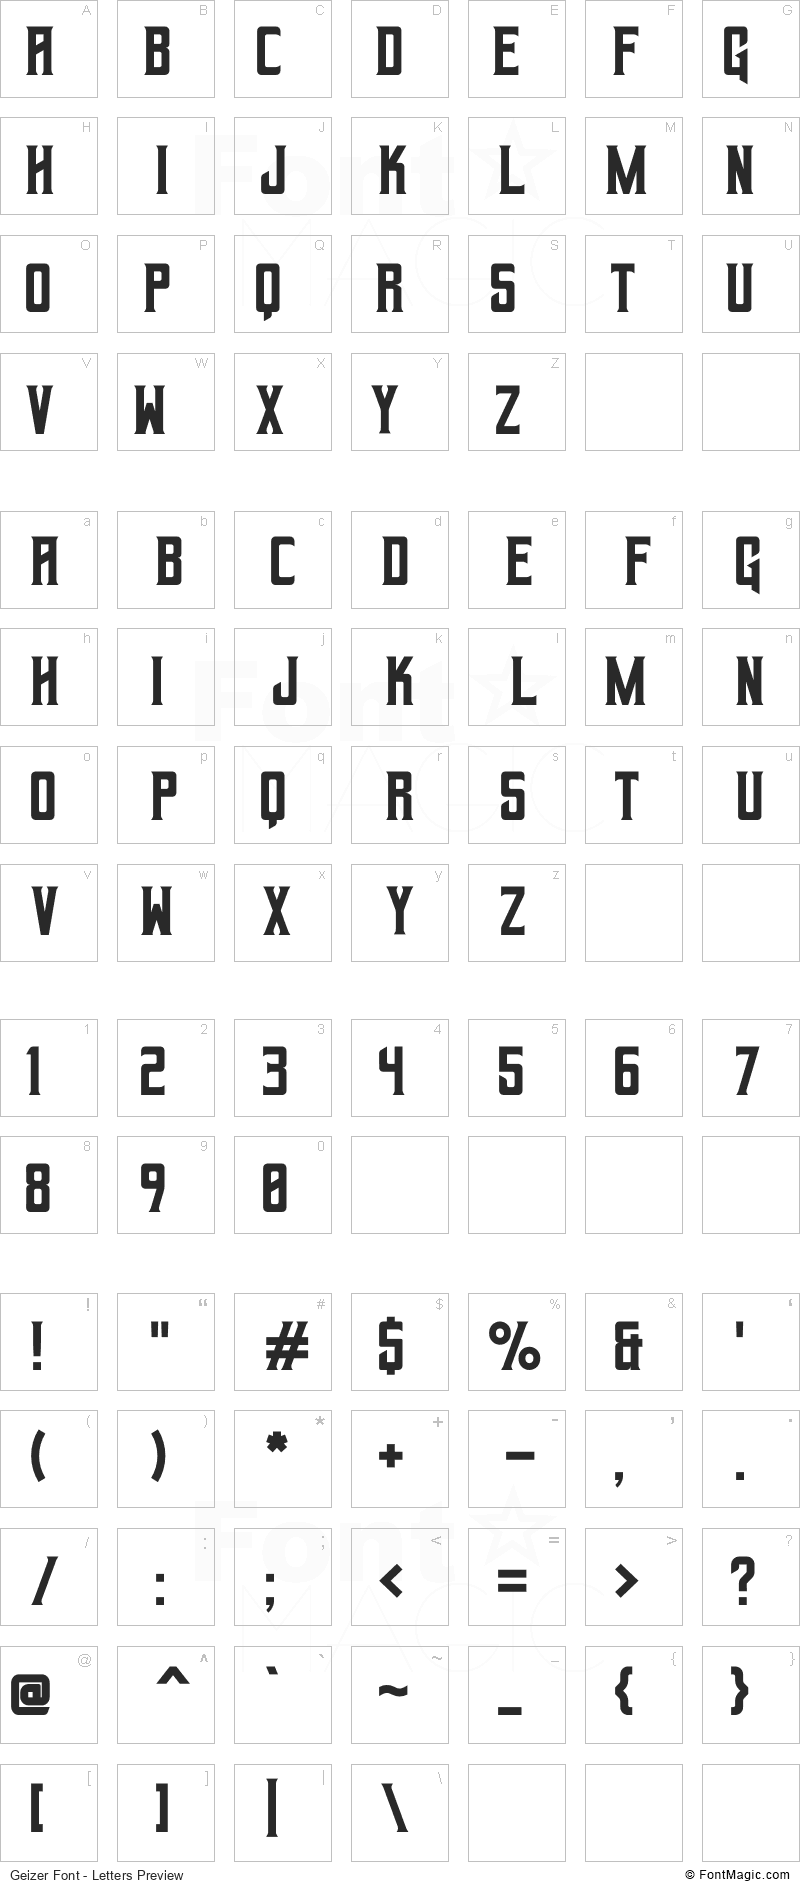 Geizer Font - All Latters Preview Chart